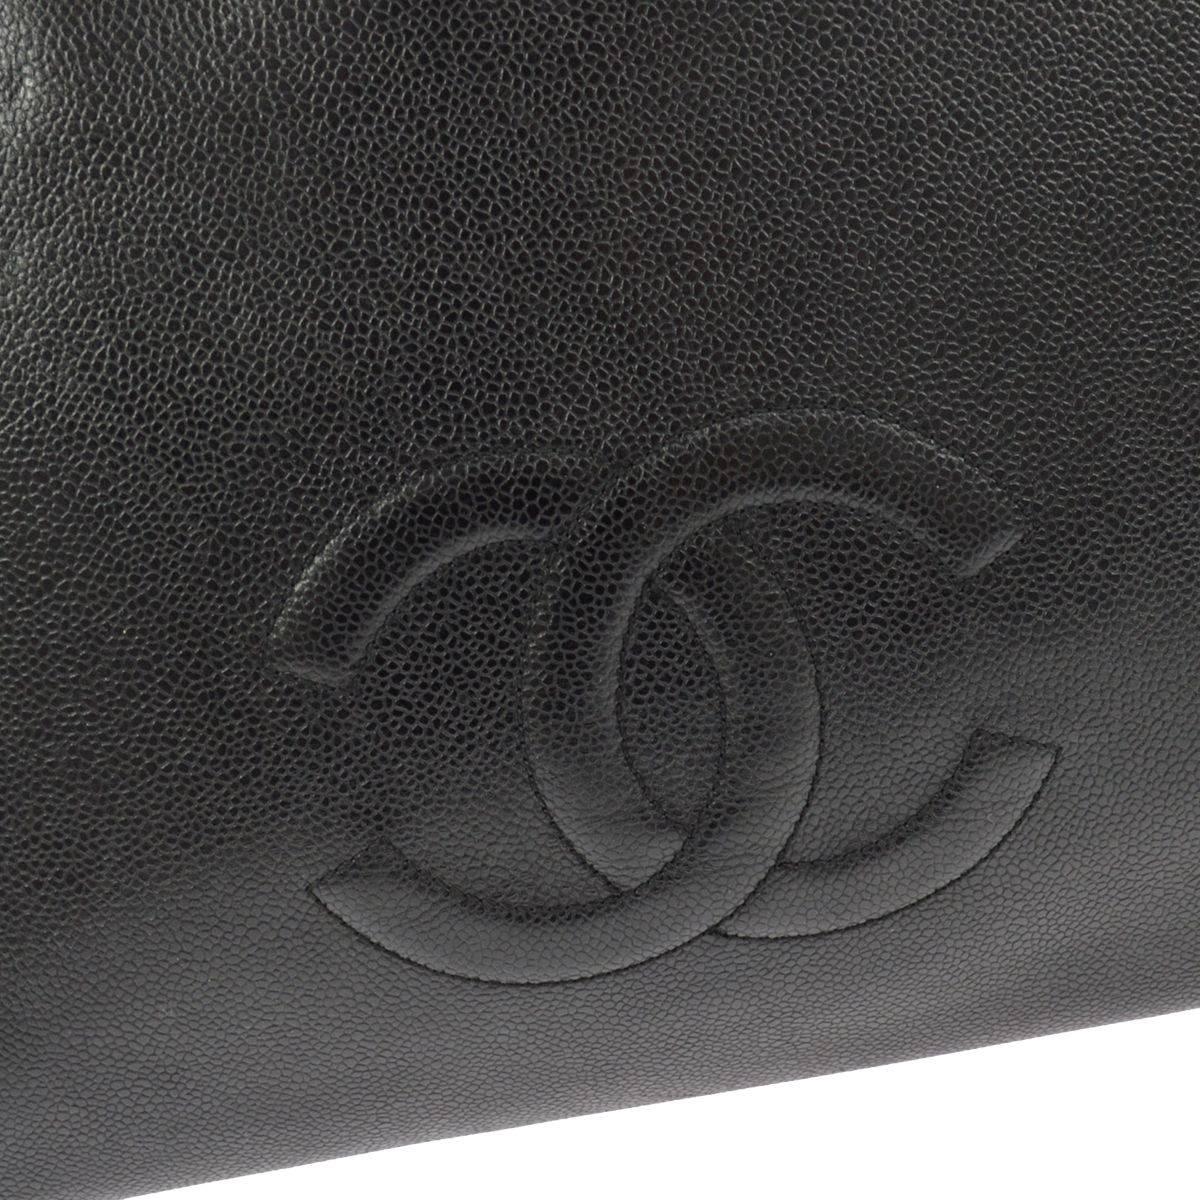 Chanel Vintage Black Caviar Leather Oversize Weekender Travel Tote Bag 

Caviar
Gold tone hardware
Made in Italy
Measures 15.5" W x 11.5" H x 6" D
Shoulder strap drop 13.5" 